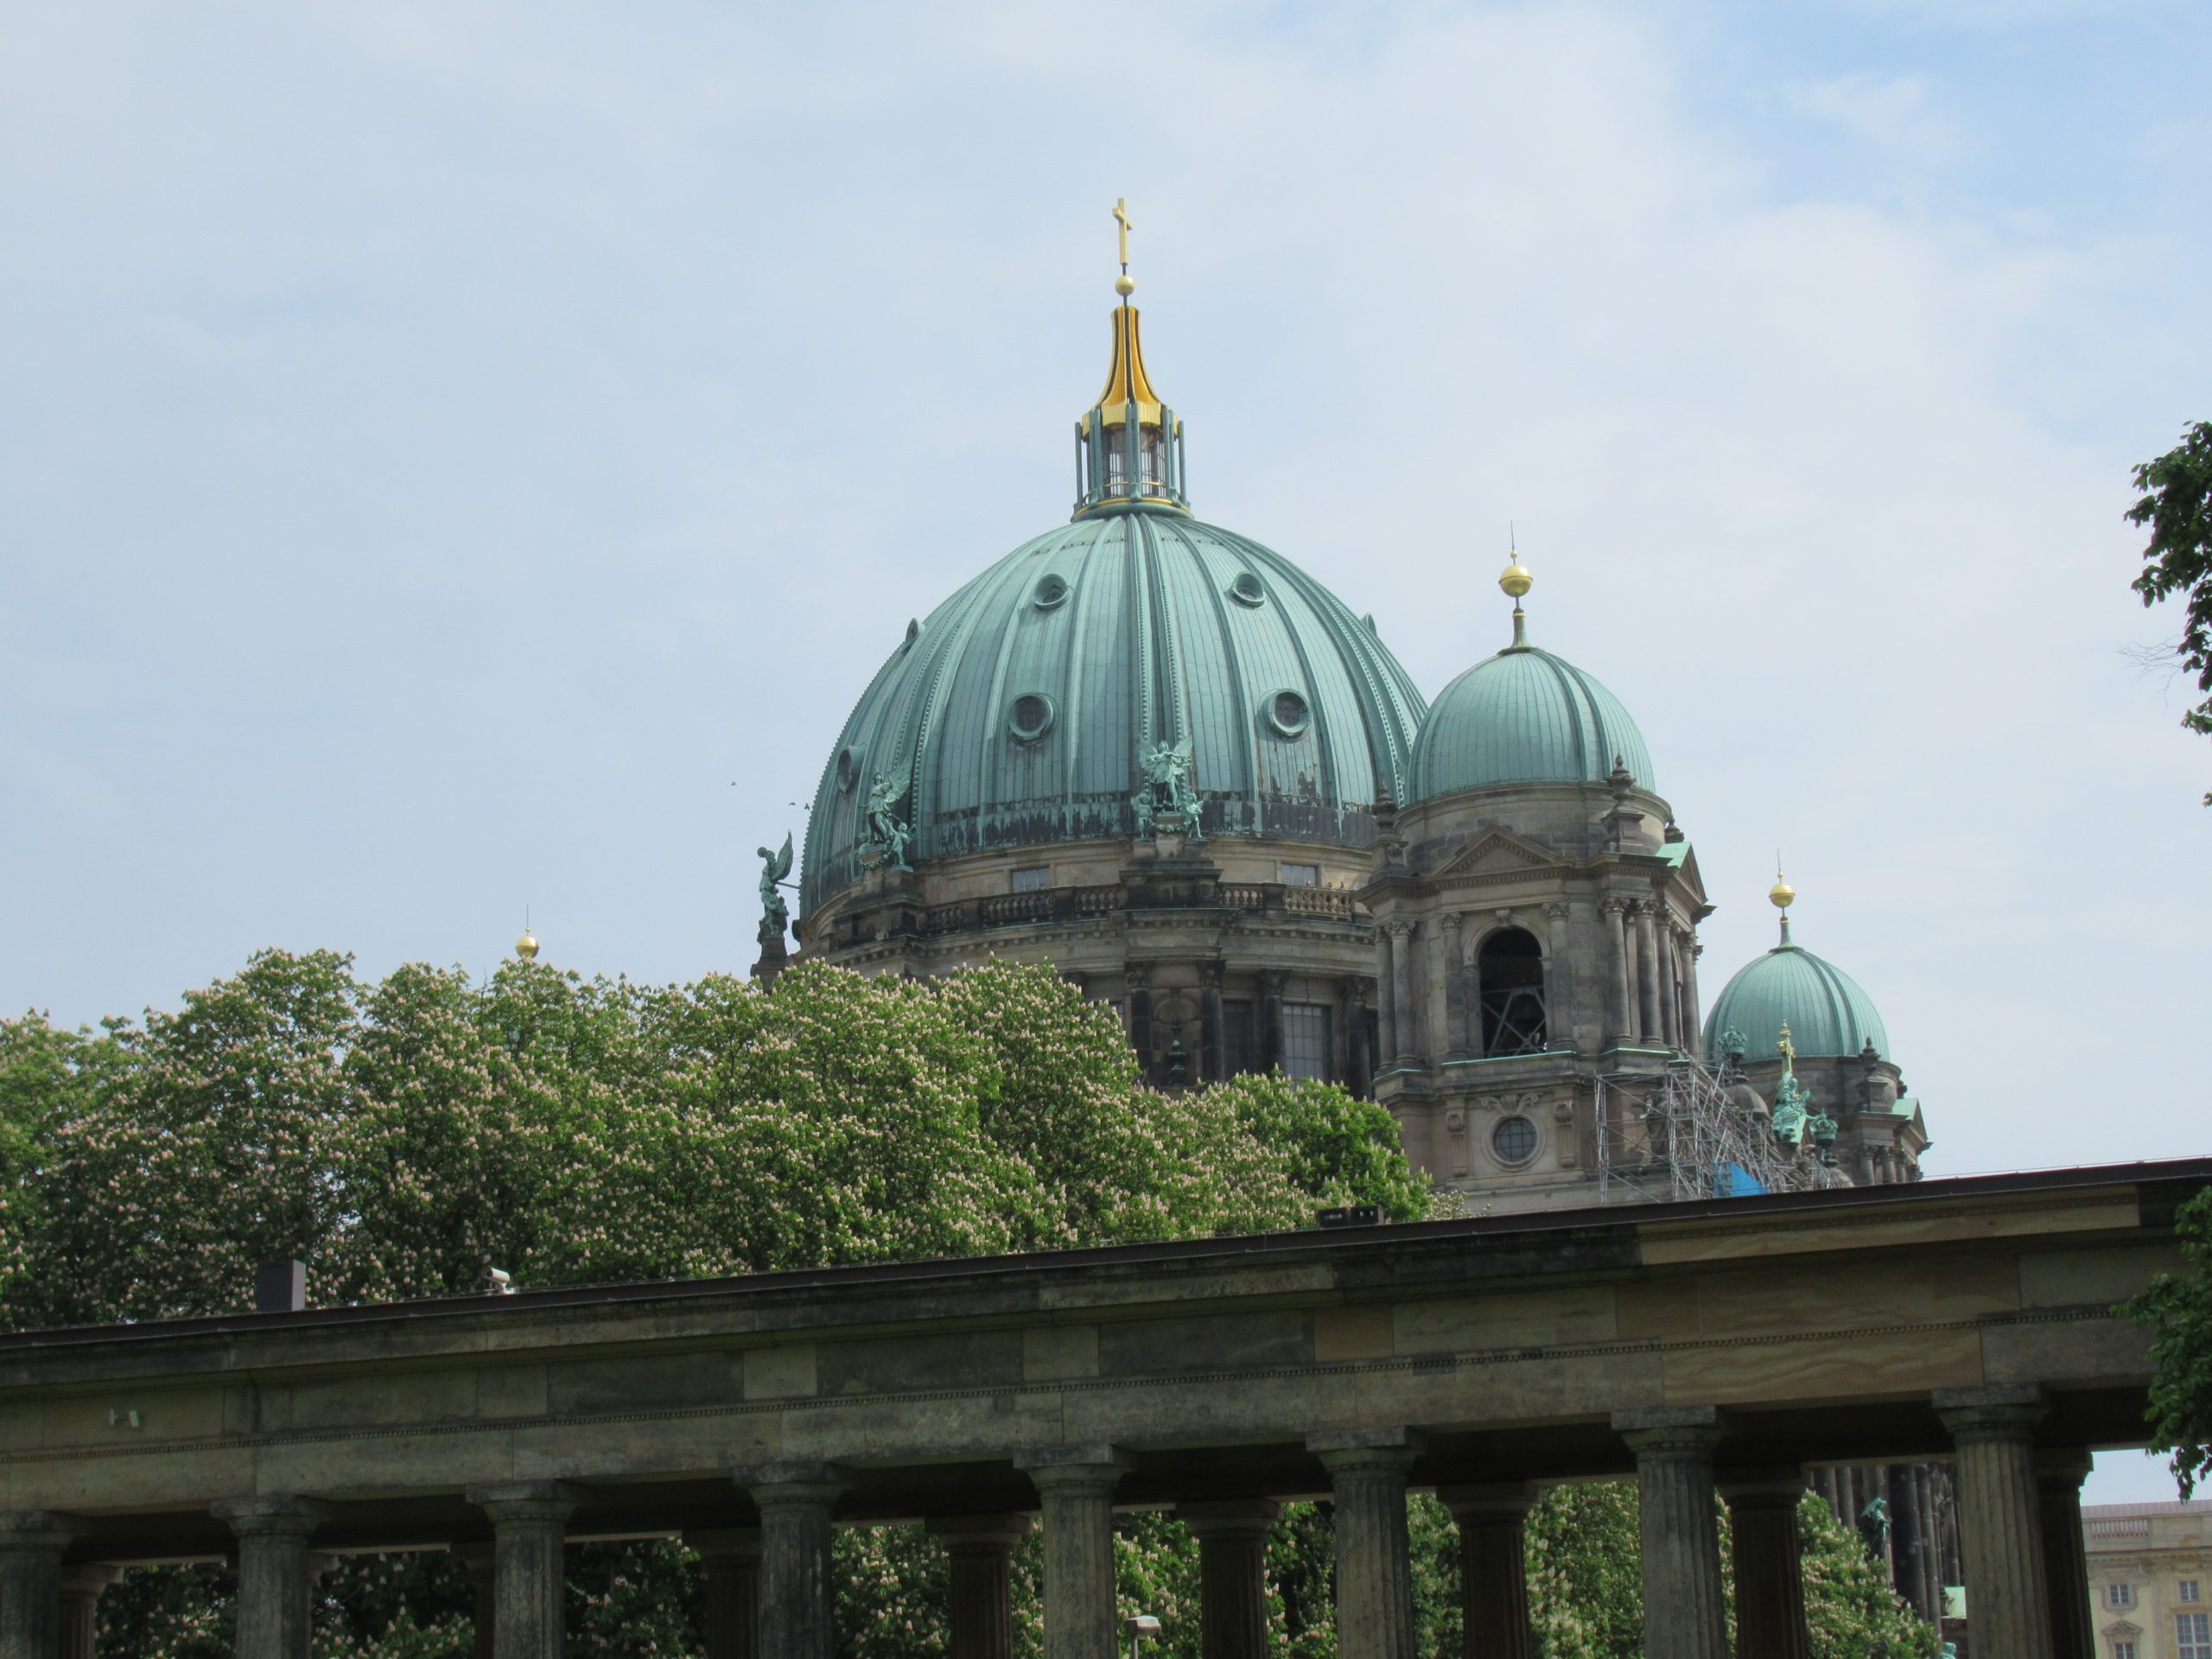 Berlin Cathedral (taken from a window in the Alte Nationalgalerie)